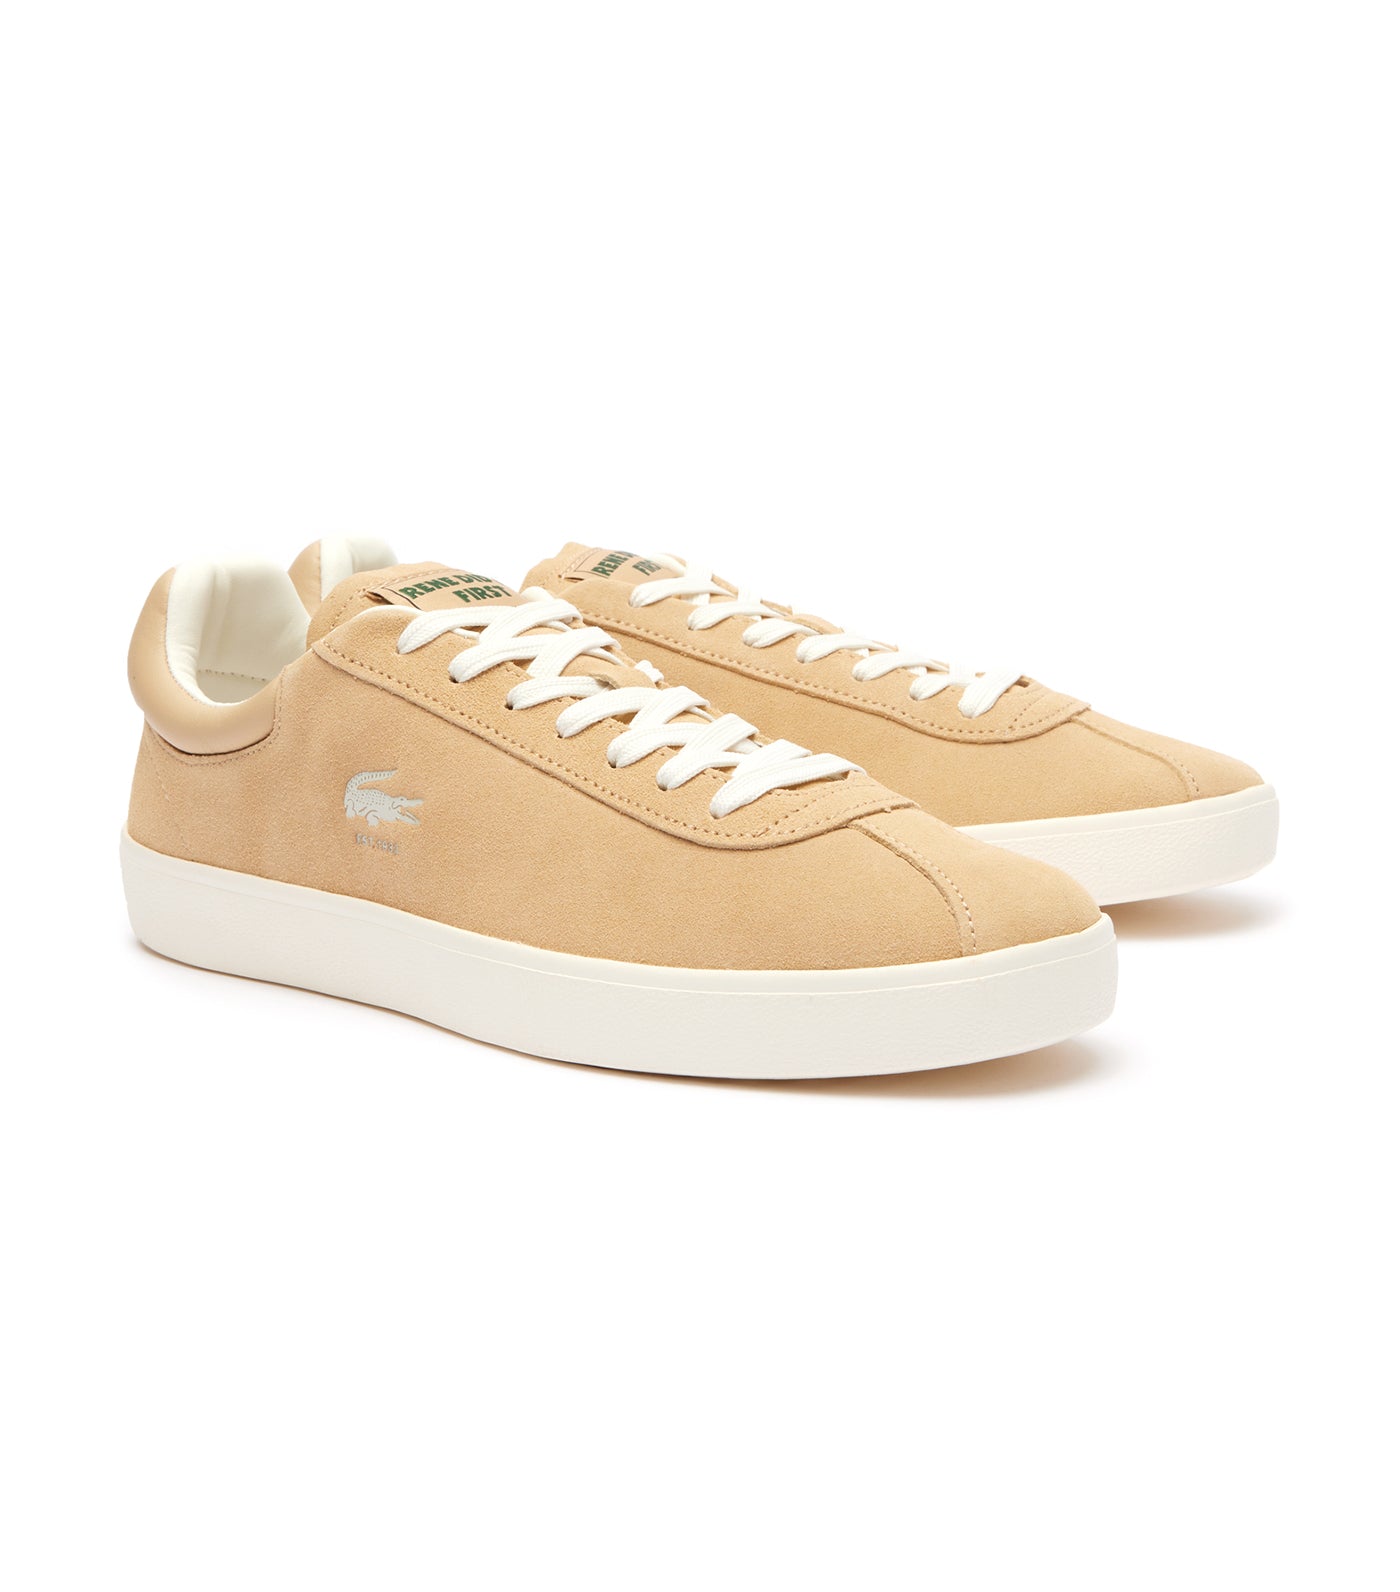 Men's Baseshot Tonal Leather Trainers Light Brown/Off White